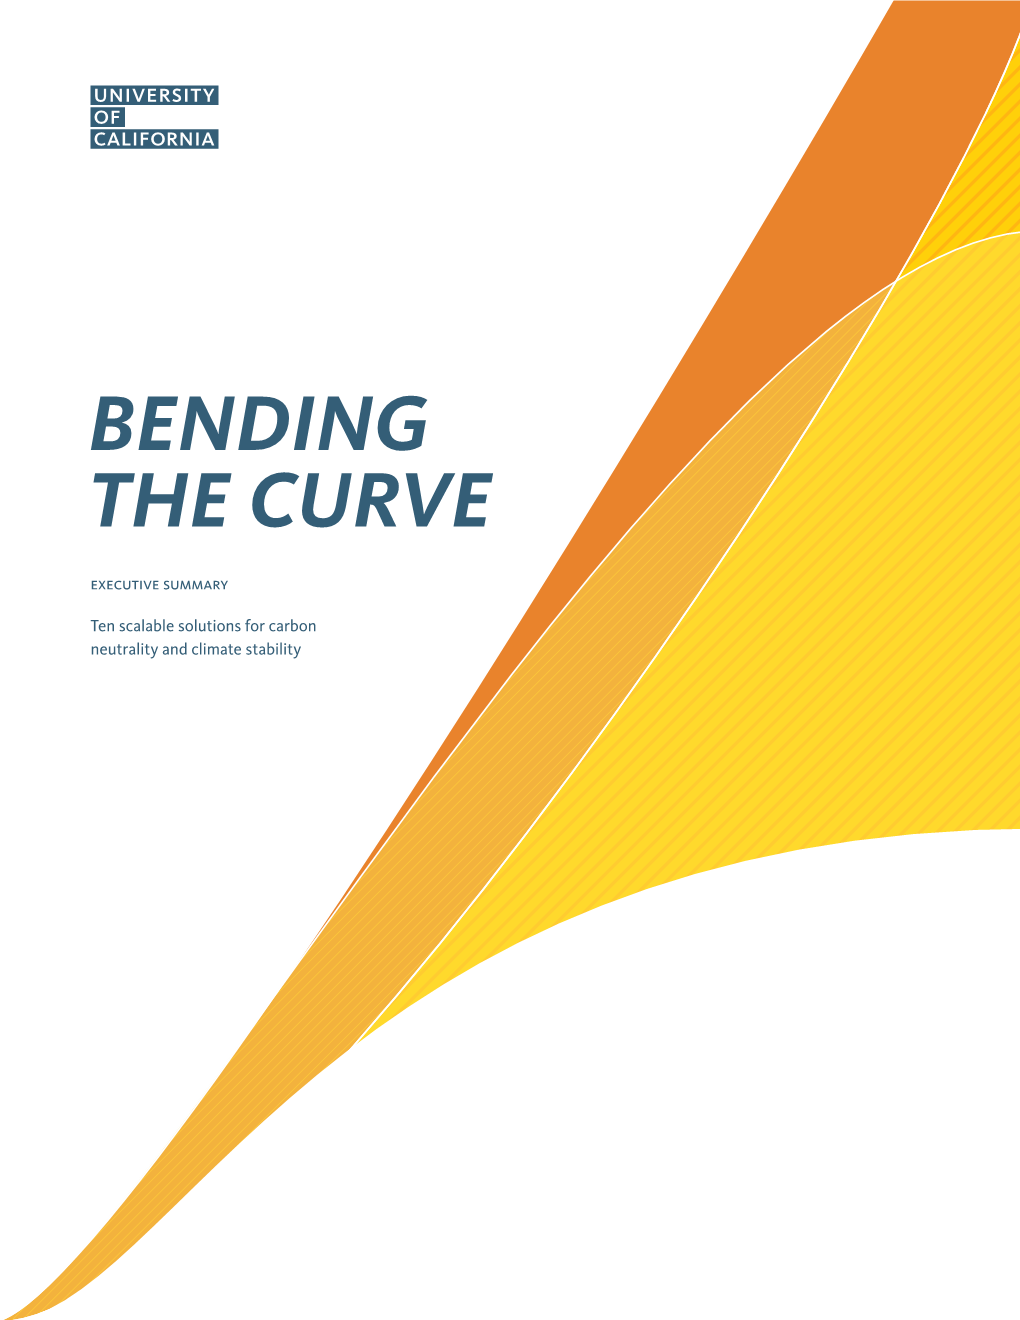 Bending the Curve: 10 Scalable Solutions for Carbon Neutrality and Climate Stability